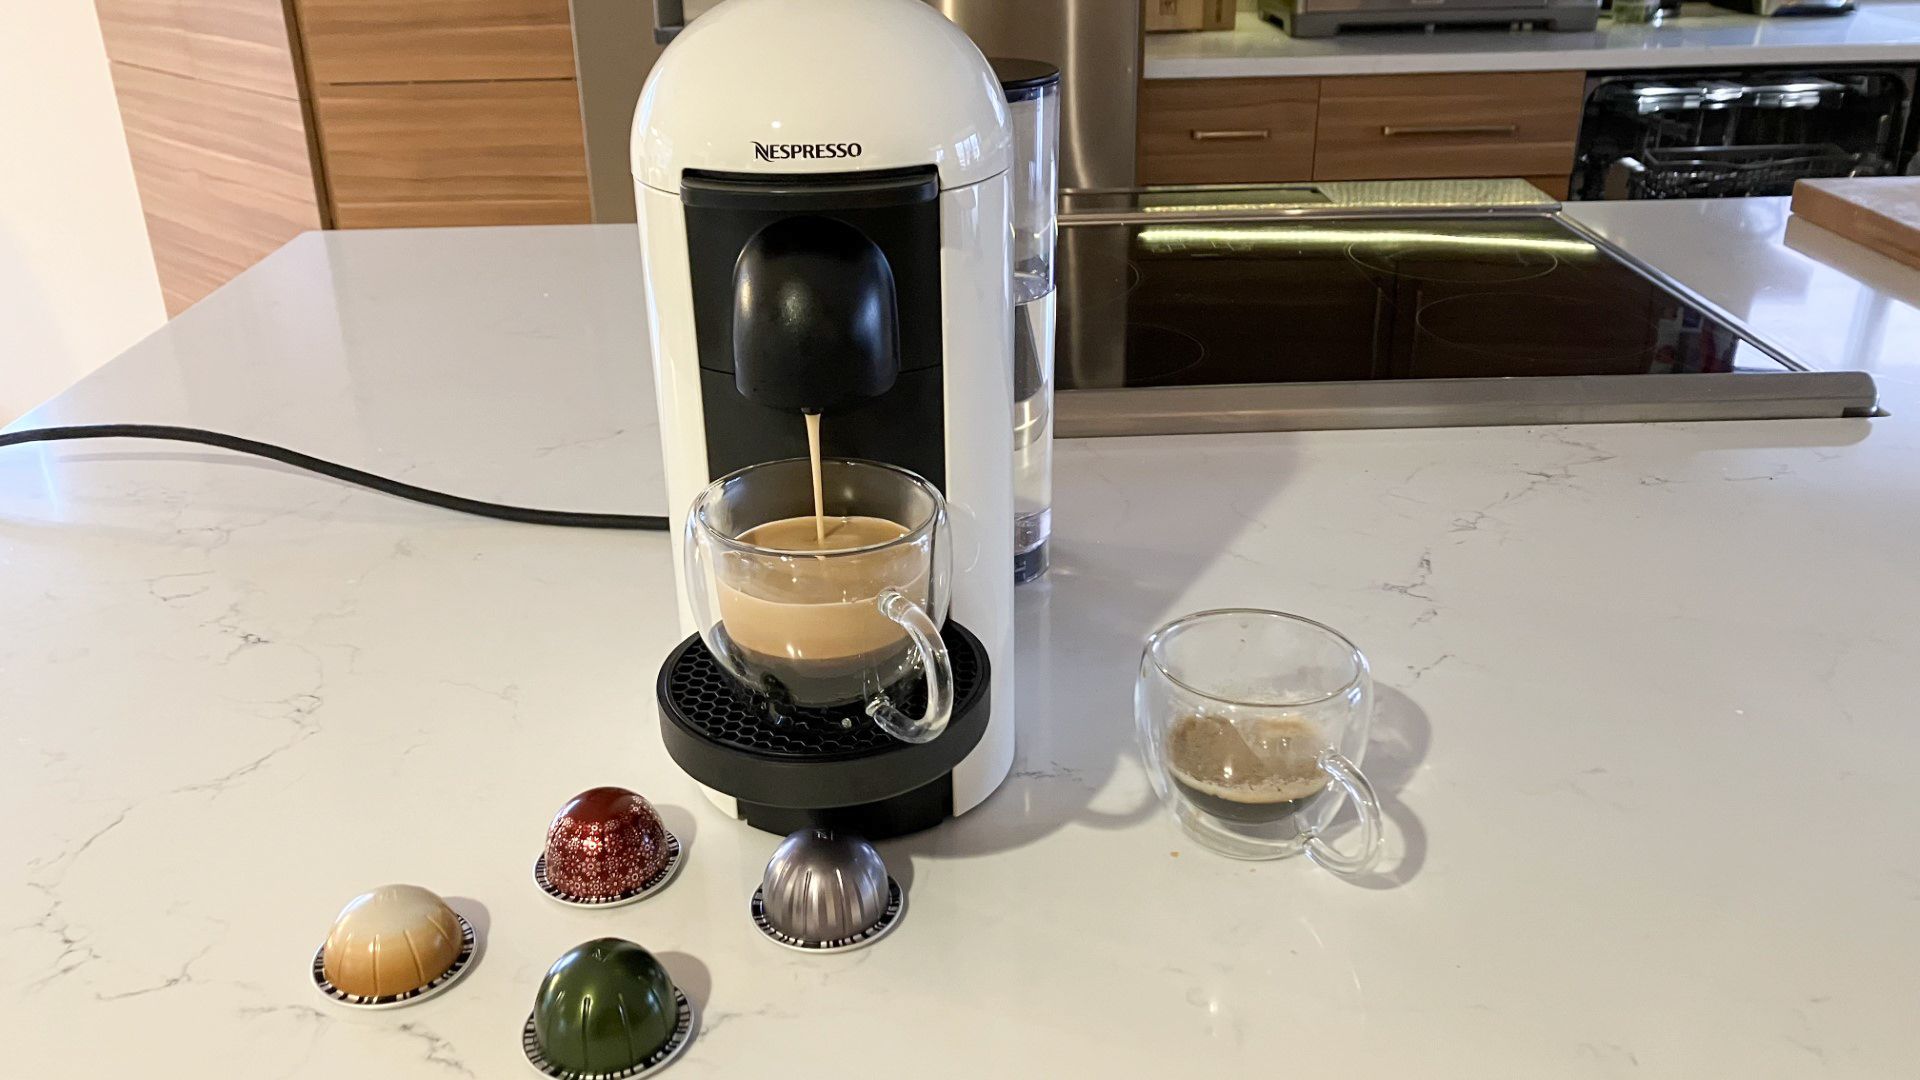 The Best Nespresso Machine for Busy Coffee Lovers